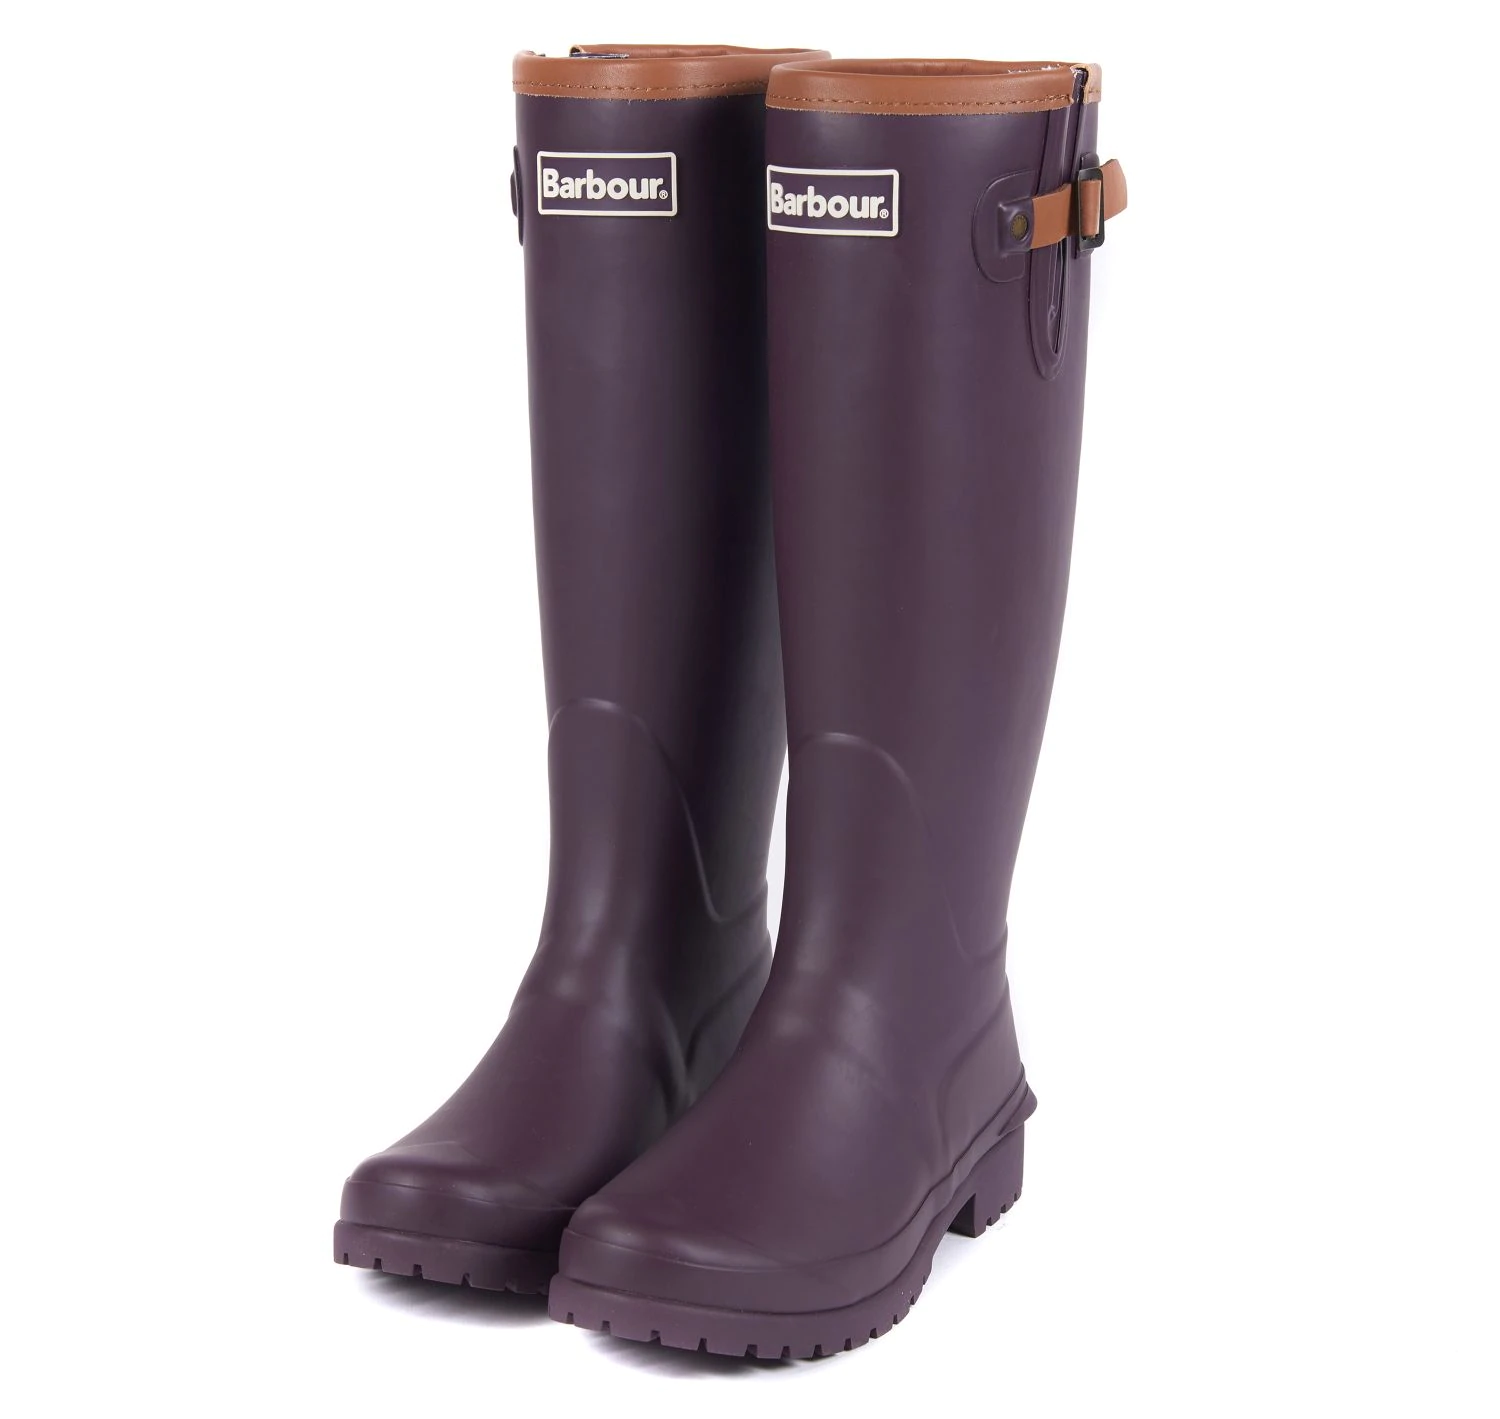 Barbour Blyth Plum Boots - Ladds